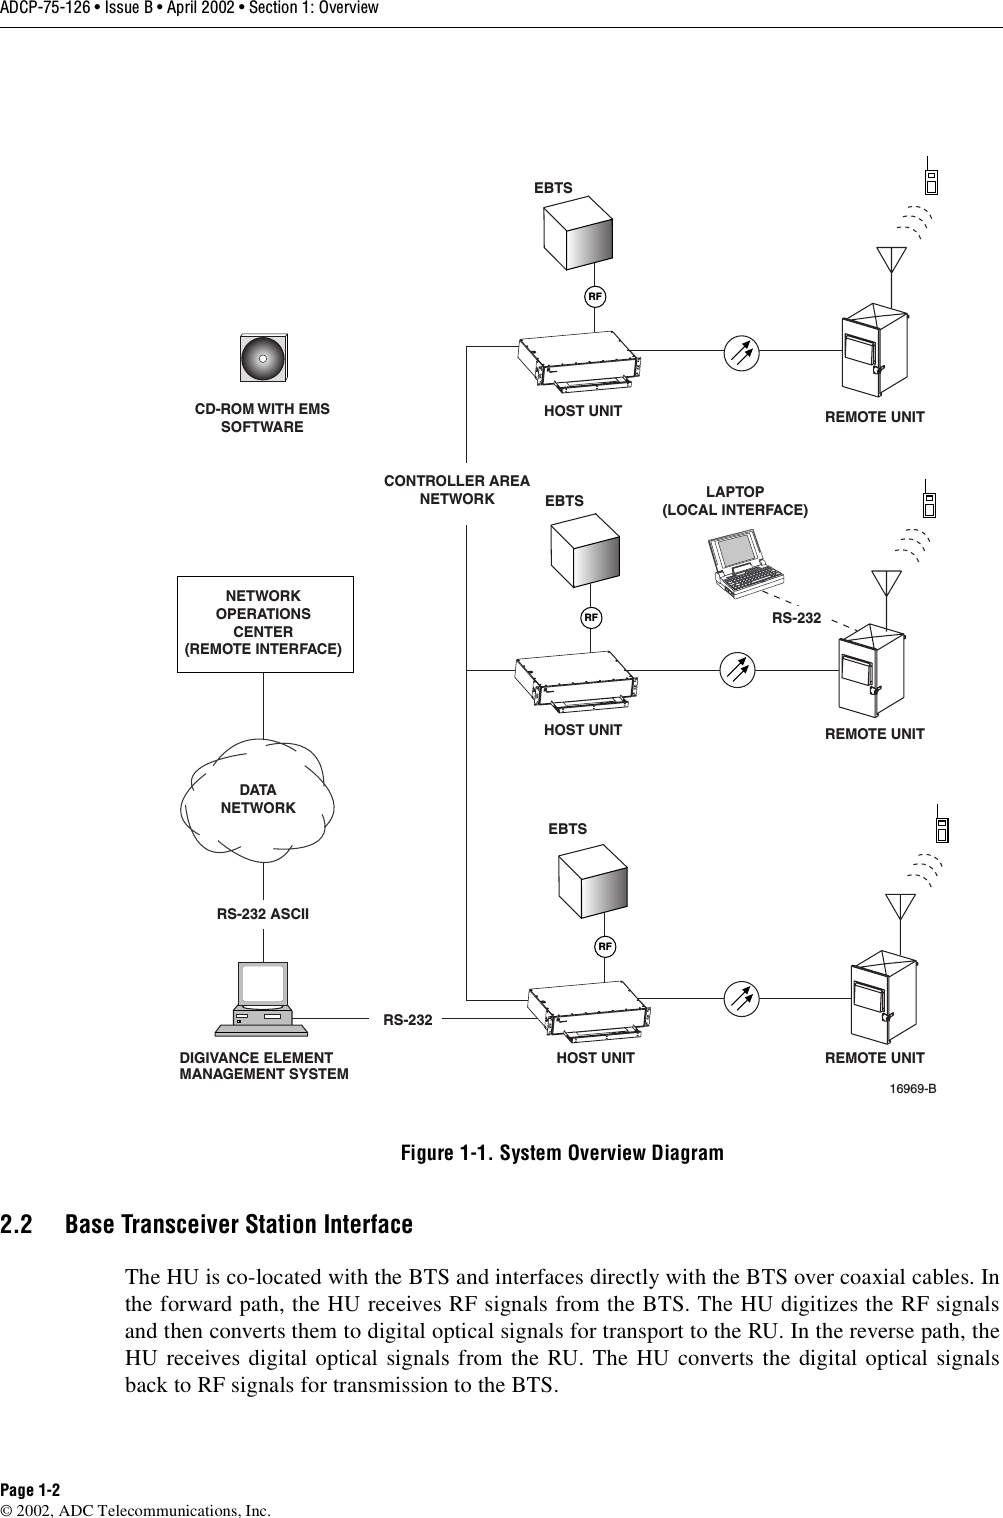 ADCP-75-126 • Issue B • April 2002 • Section 1: OverviewPage 1-2©2002, ADC Telecommunications, Inc.Figure 1-1. System Overview Diagram2.2 Base Transceiver Station InterfaceThe HU is co-located with the BTS and interfaces directly with the BTS over coaxial cables. Inthe forward path, the HU receives RF signals from the BTS. The HU digitizes the RF signalsand then converts them to digital optical signals for transport to the RU. In the reverse path, theHU receives digital optical signals from the RU. The HU converts the digital optical signalsback to RF signals for transmission to the BTS.EBTSEBTSEBTSDIGIVANCE ELEMENTMANAGEMENT SYSTEMRFRFRFHOST UNITHOST UNITHOST UNITREMOTE UNITREMOTE UNITREMOTE UNITNETWORKOPERATIONSCENTER(REMOTE INTERFACE)LAPTOP(LOCAL INTERFACE)DATANETWORKCONTROLLER AREANETWORKRS-232 ASCIIRS-232RS-23216969-BCD-ROM WITH EMSSOFTWARE